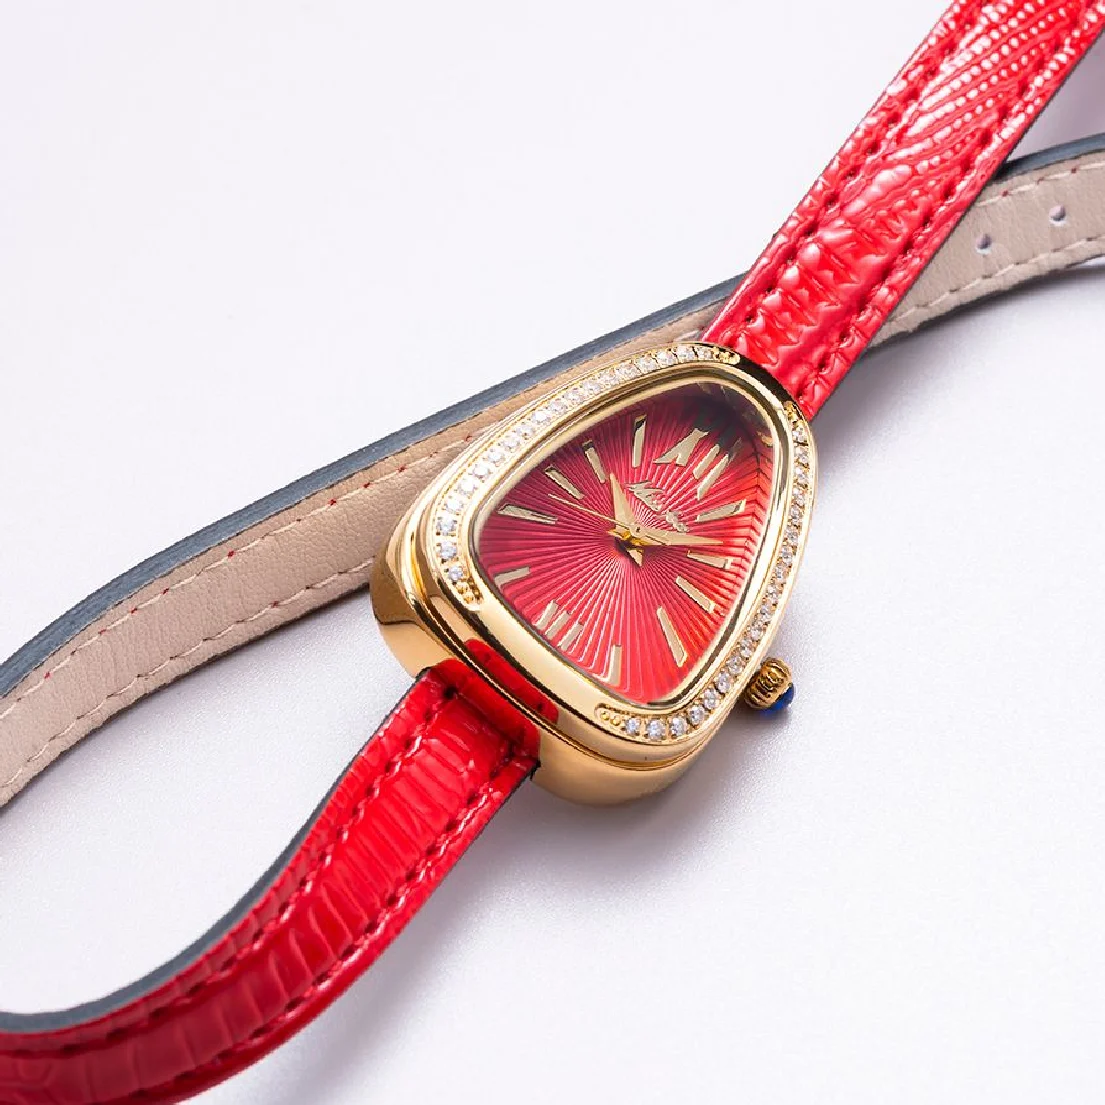 Long Leather Bracelet 18K Gold Plated Snake Bezel Japan Quartz Movement Stainless Steel 30m Waterproof Red Dial Women's Watches enlarge